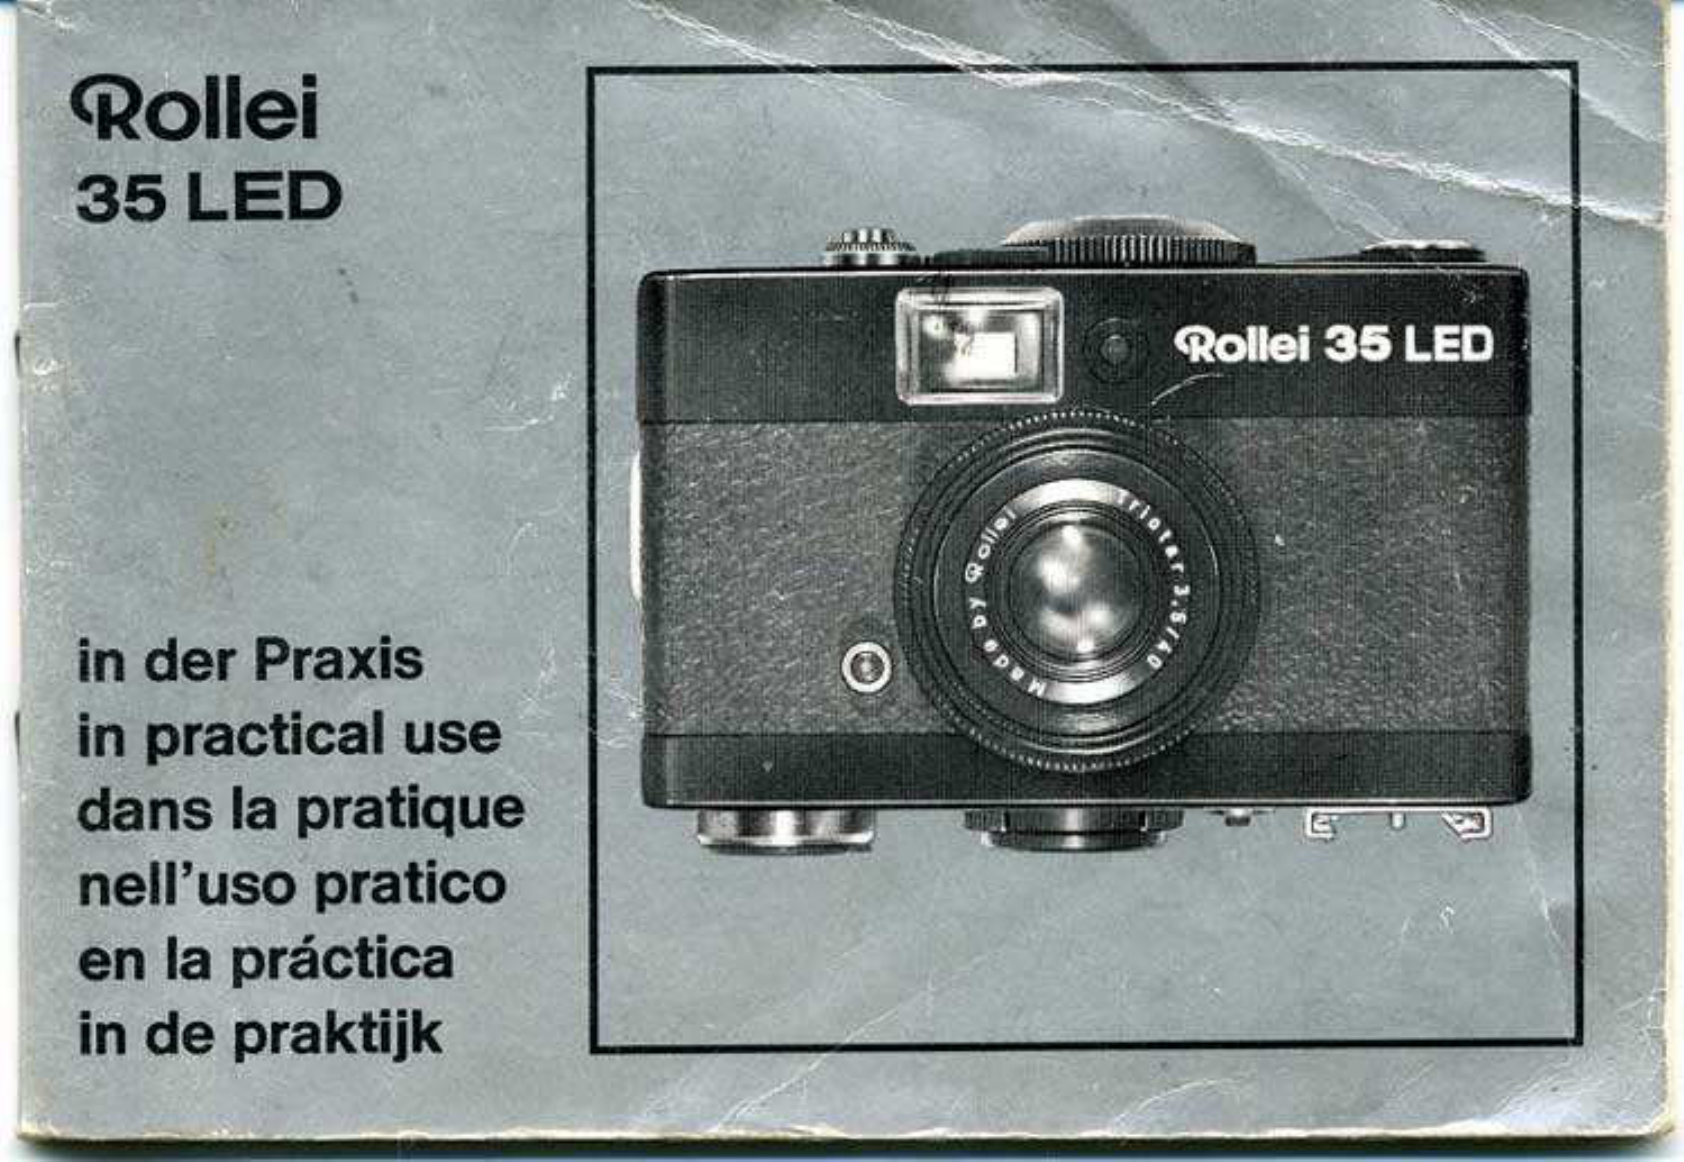 Rollei 35 LED In Practical Use Manual Instruction Book Genuine Original 